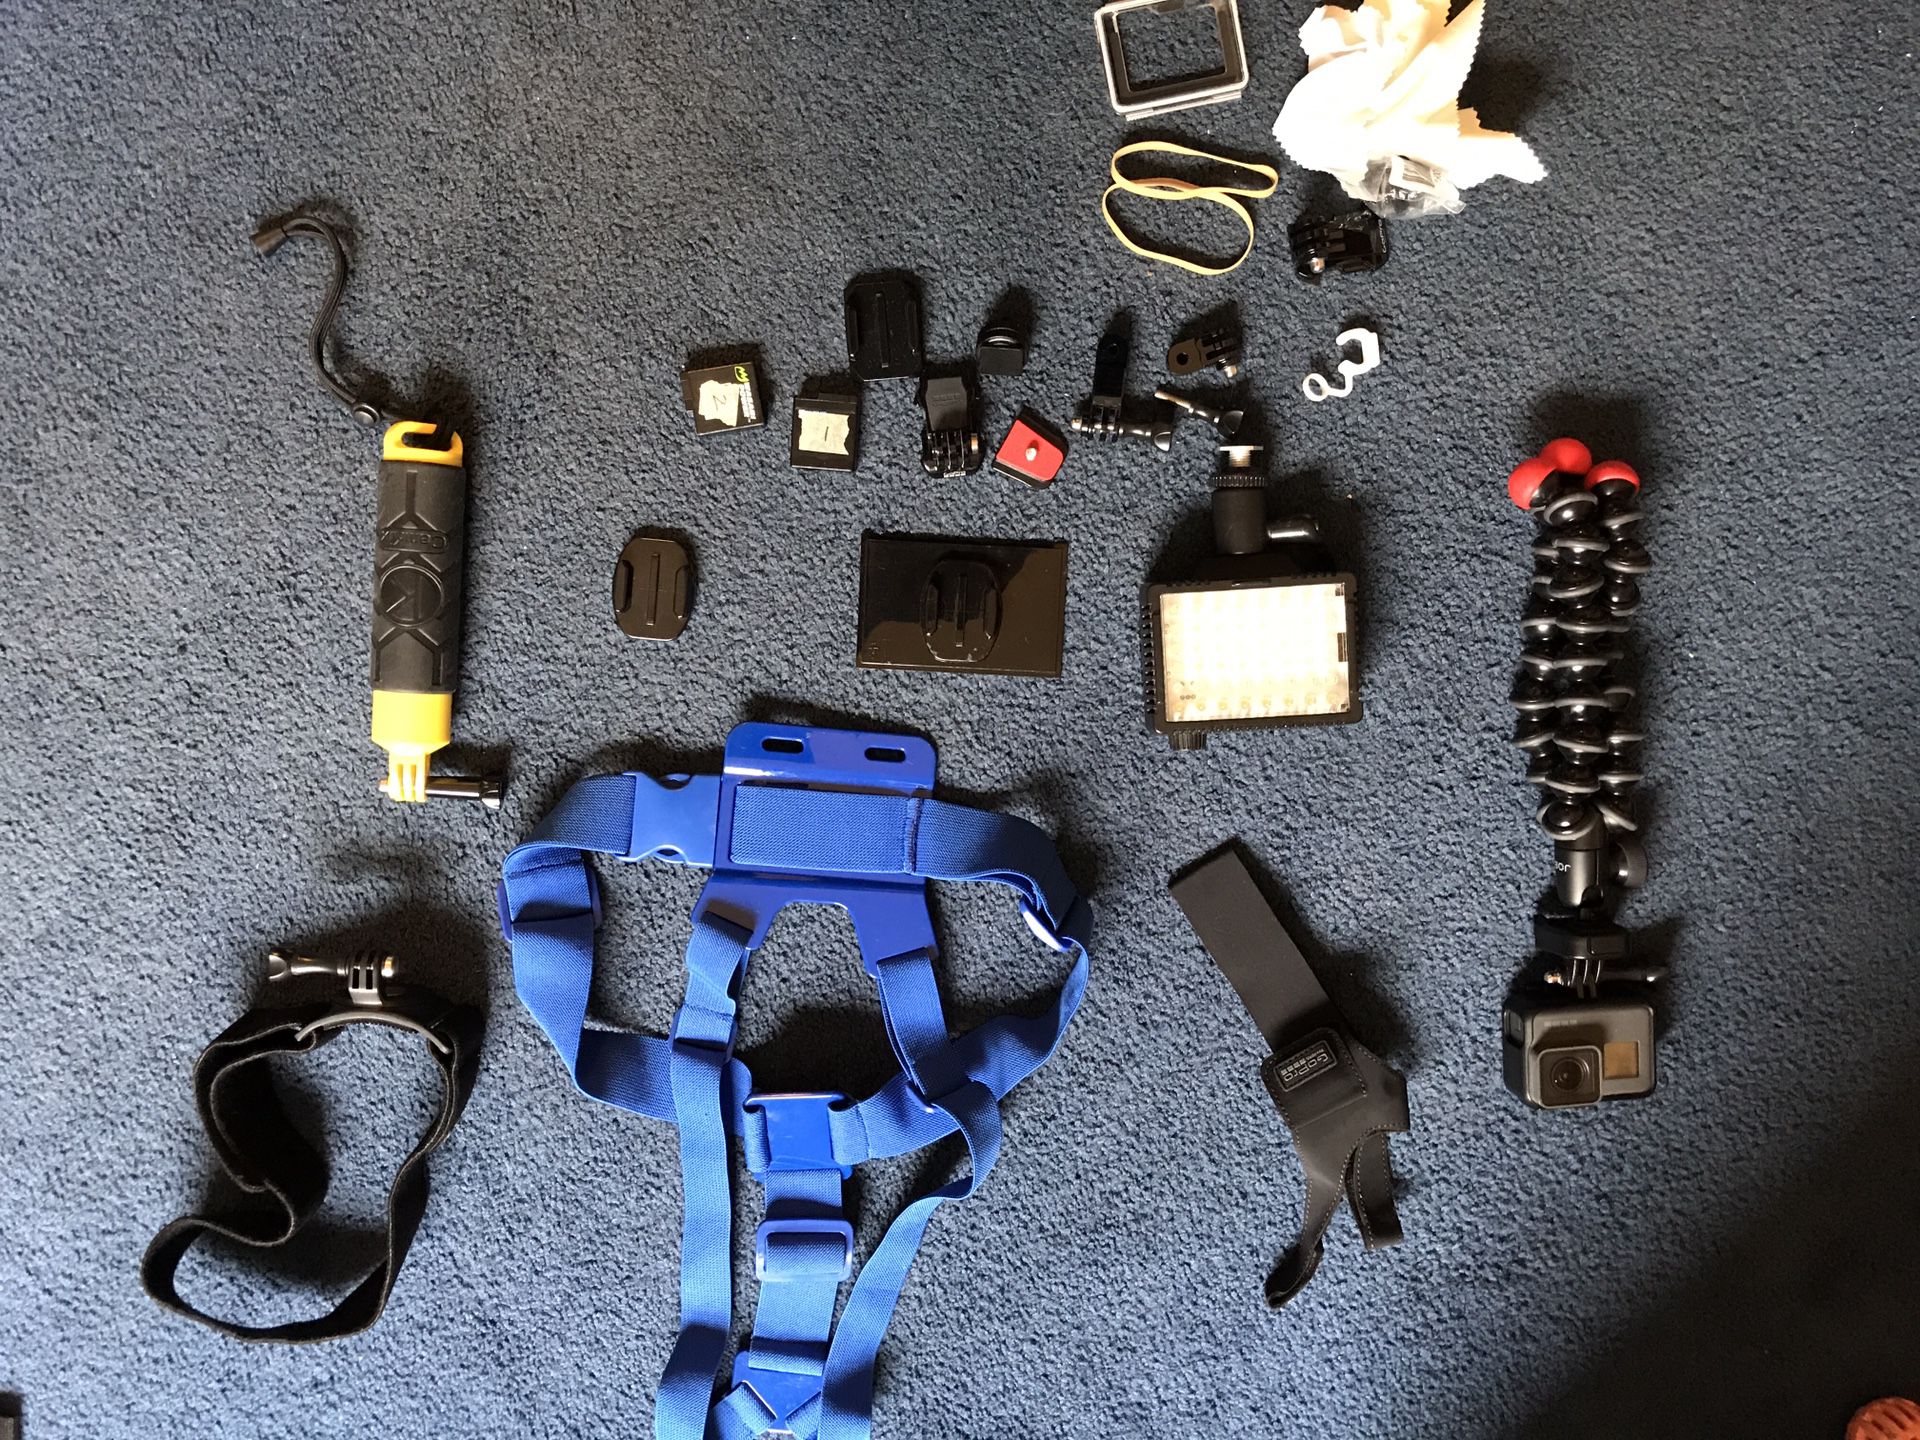 Go pro hero 5 black with hundreds of accessories